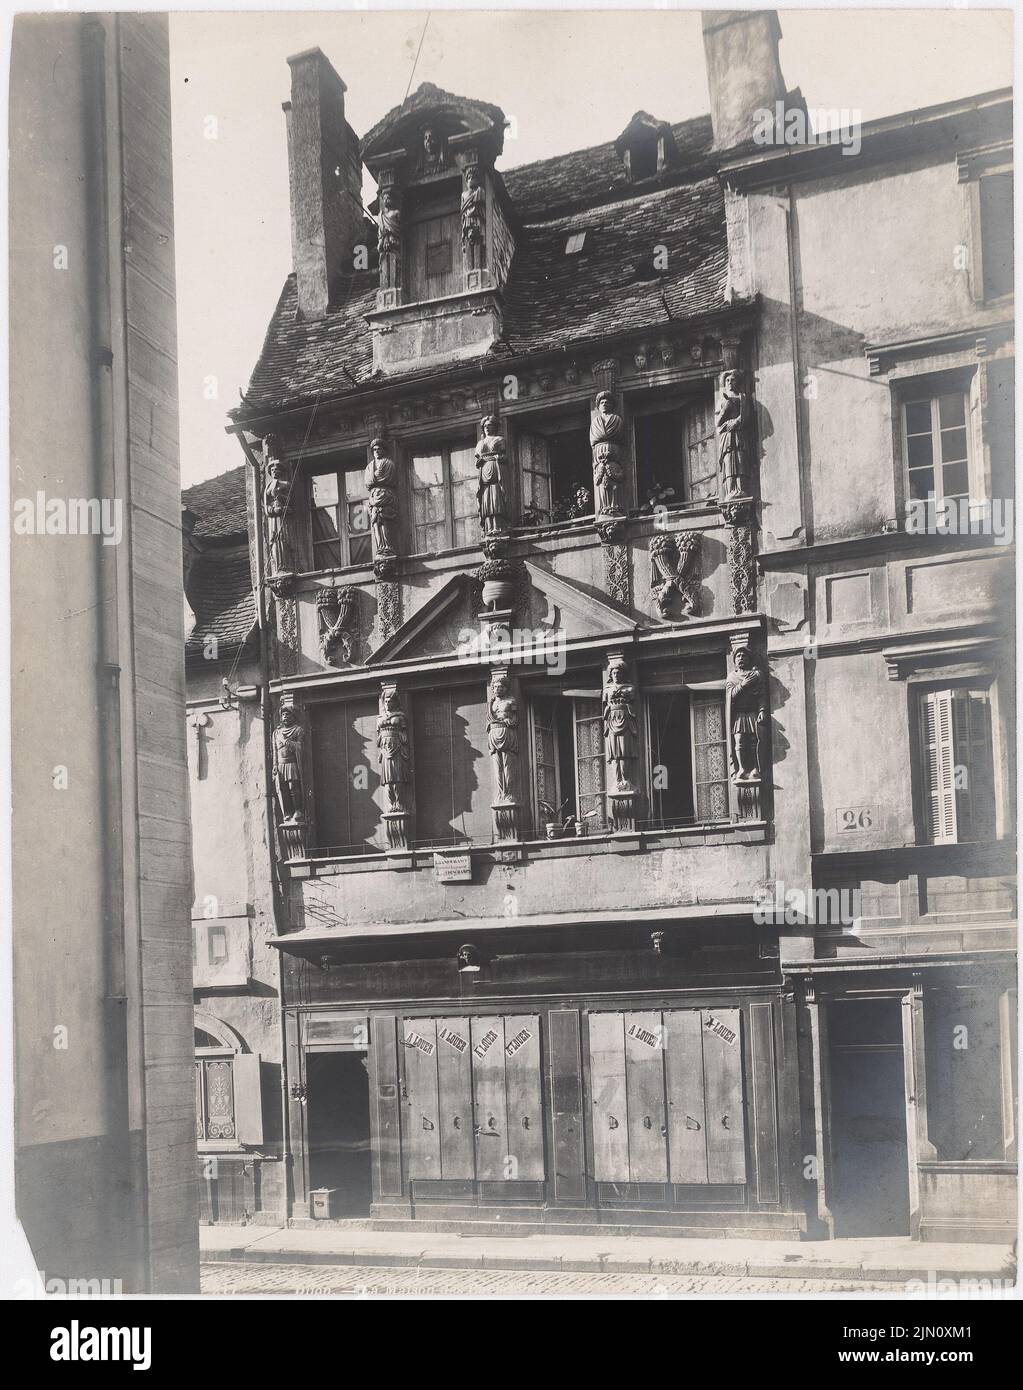 Neurdein, Maison of the Car ... (?), Dijon (without date): Facade patrician house with rich figurative (Karyatids) facade jewelry. Photo, 28.2 x 22.2 cm (including scan edges) N.N. : Maison des Car.. (?), Dijon Stock Photo